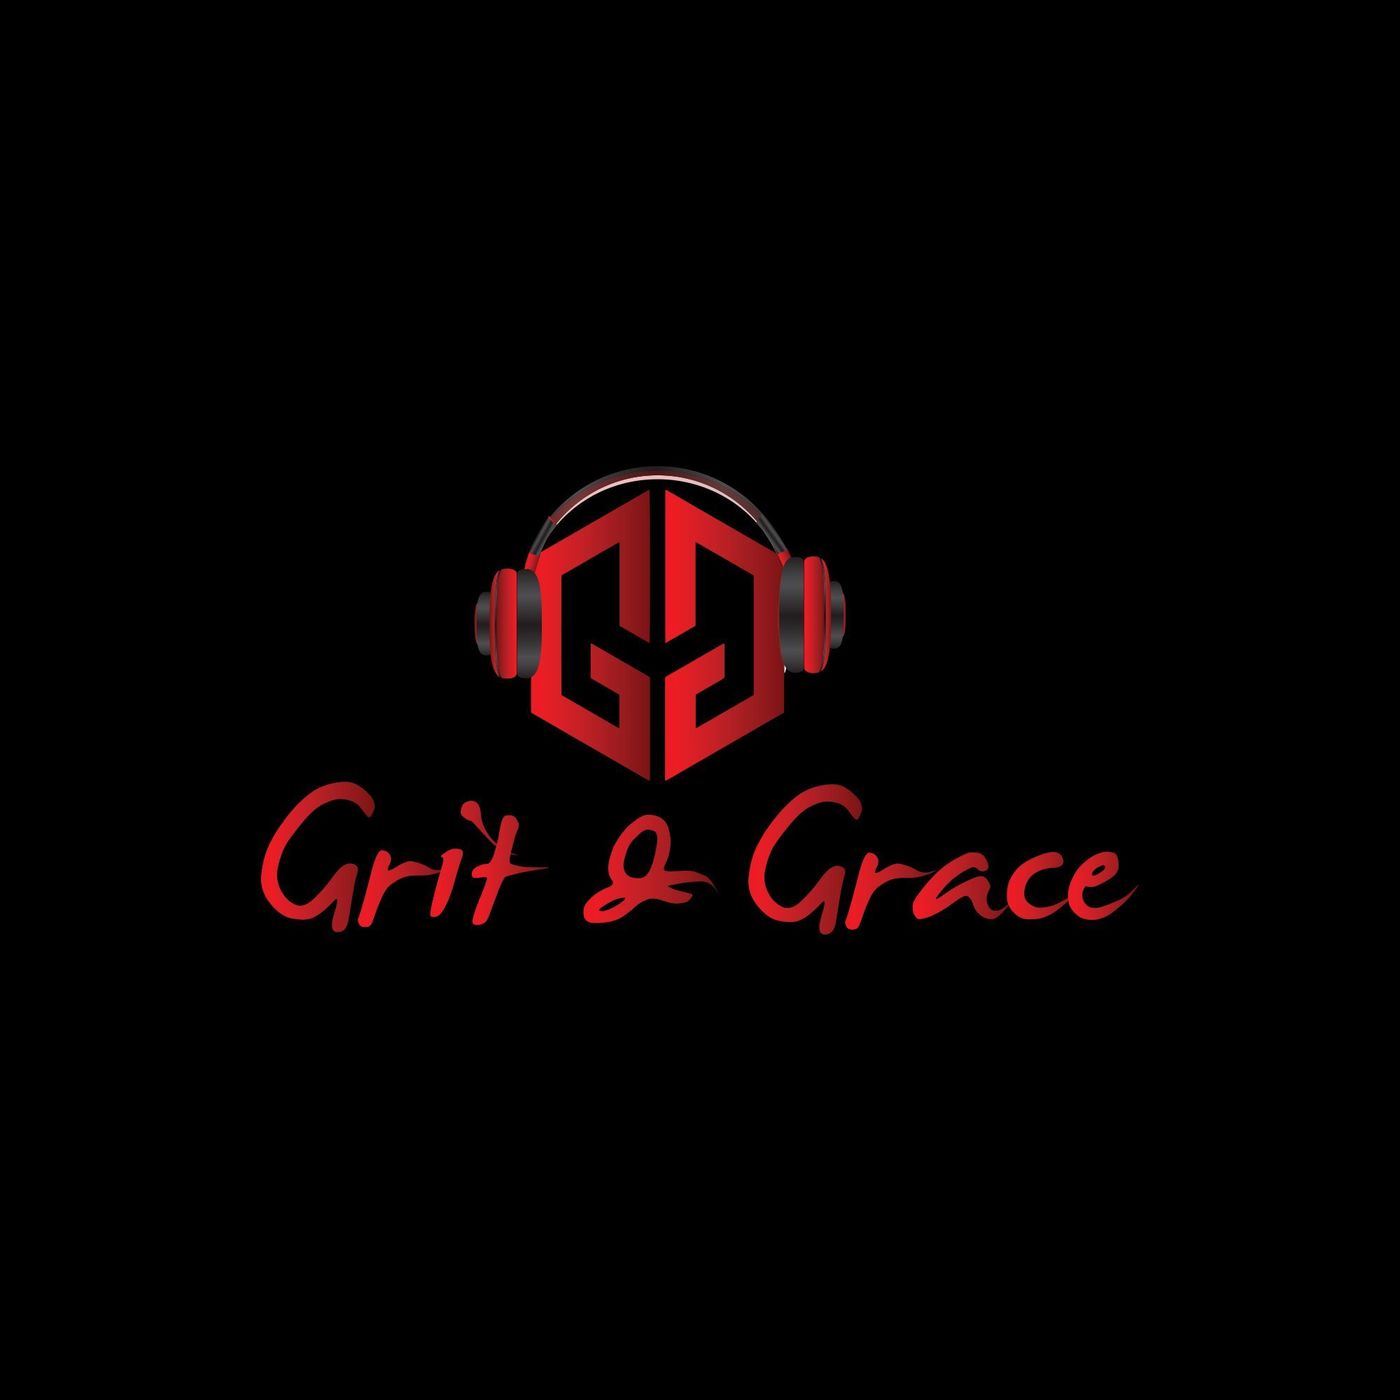 Grit and Grace Bonus Episode: Fundraising 101 - What you need to know to take your business to the next level